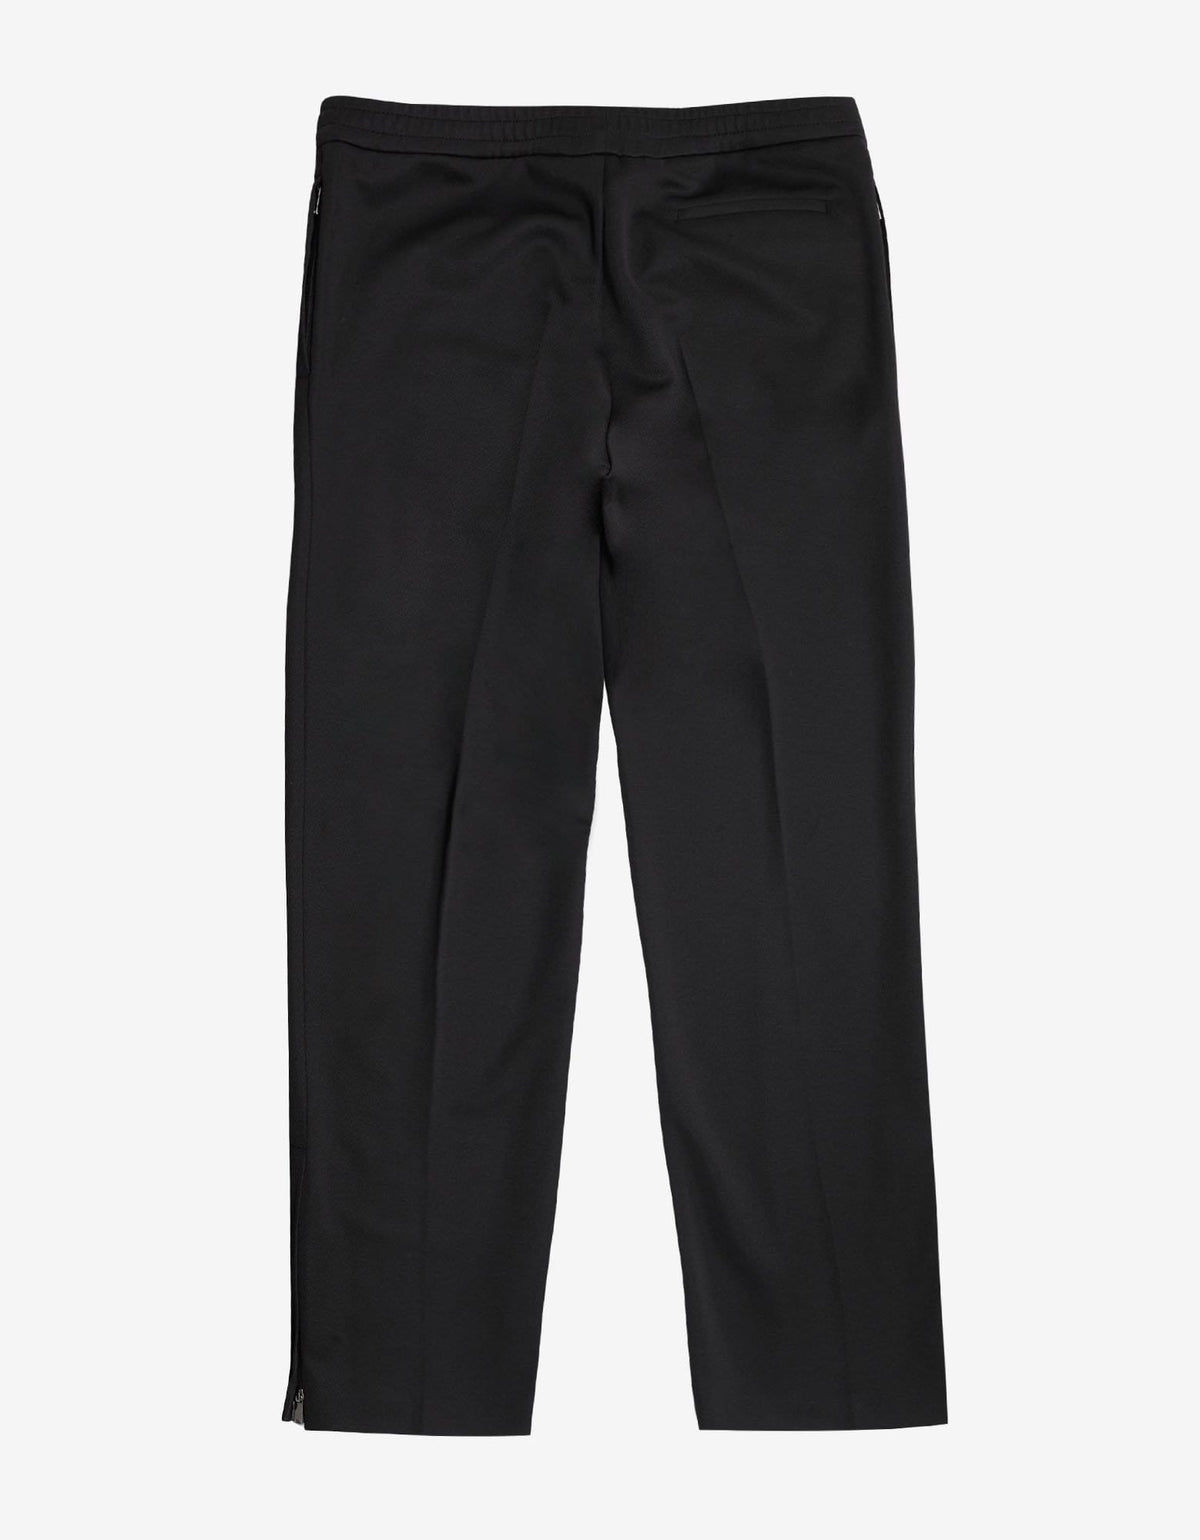 Valentino Black Trousers with Tonal Stripes